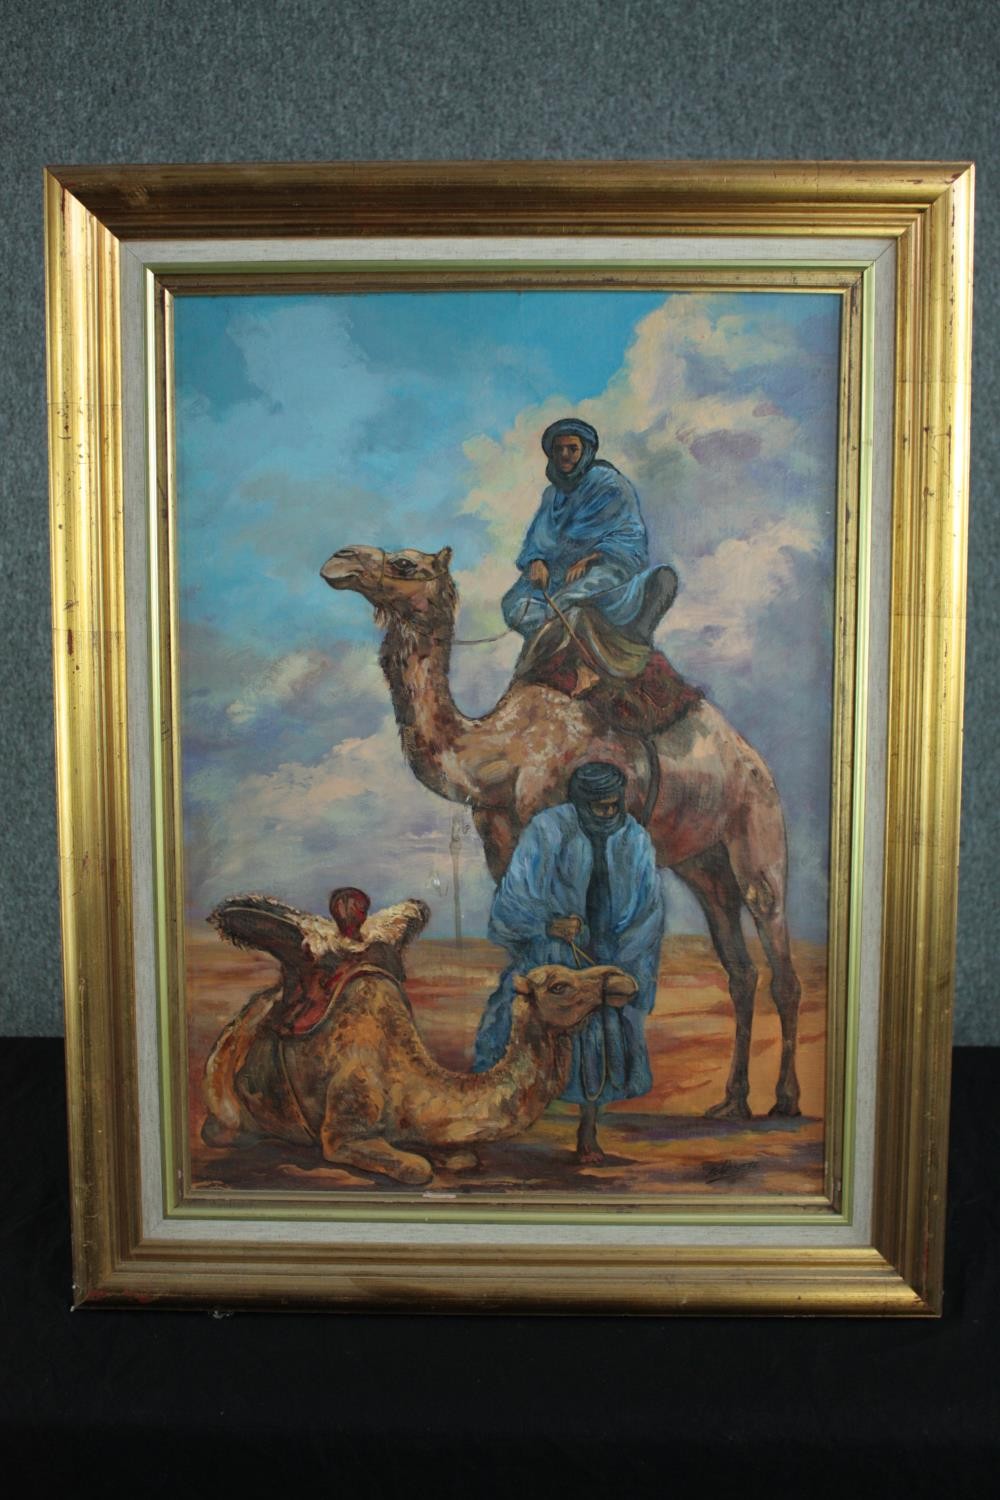 Oil painting on board. Arabs and camel. Signed 'Barnete' lower right. Framed. H.78 W.60 cm. - Image 2 of 4